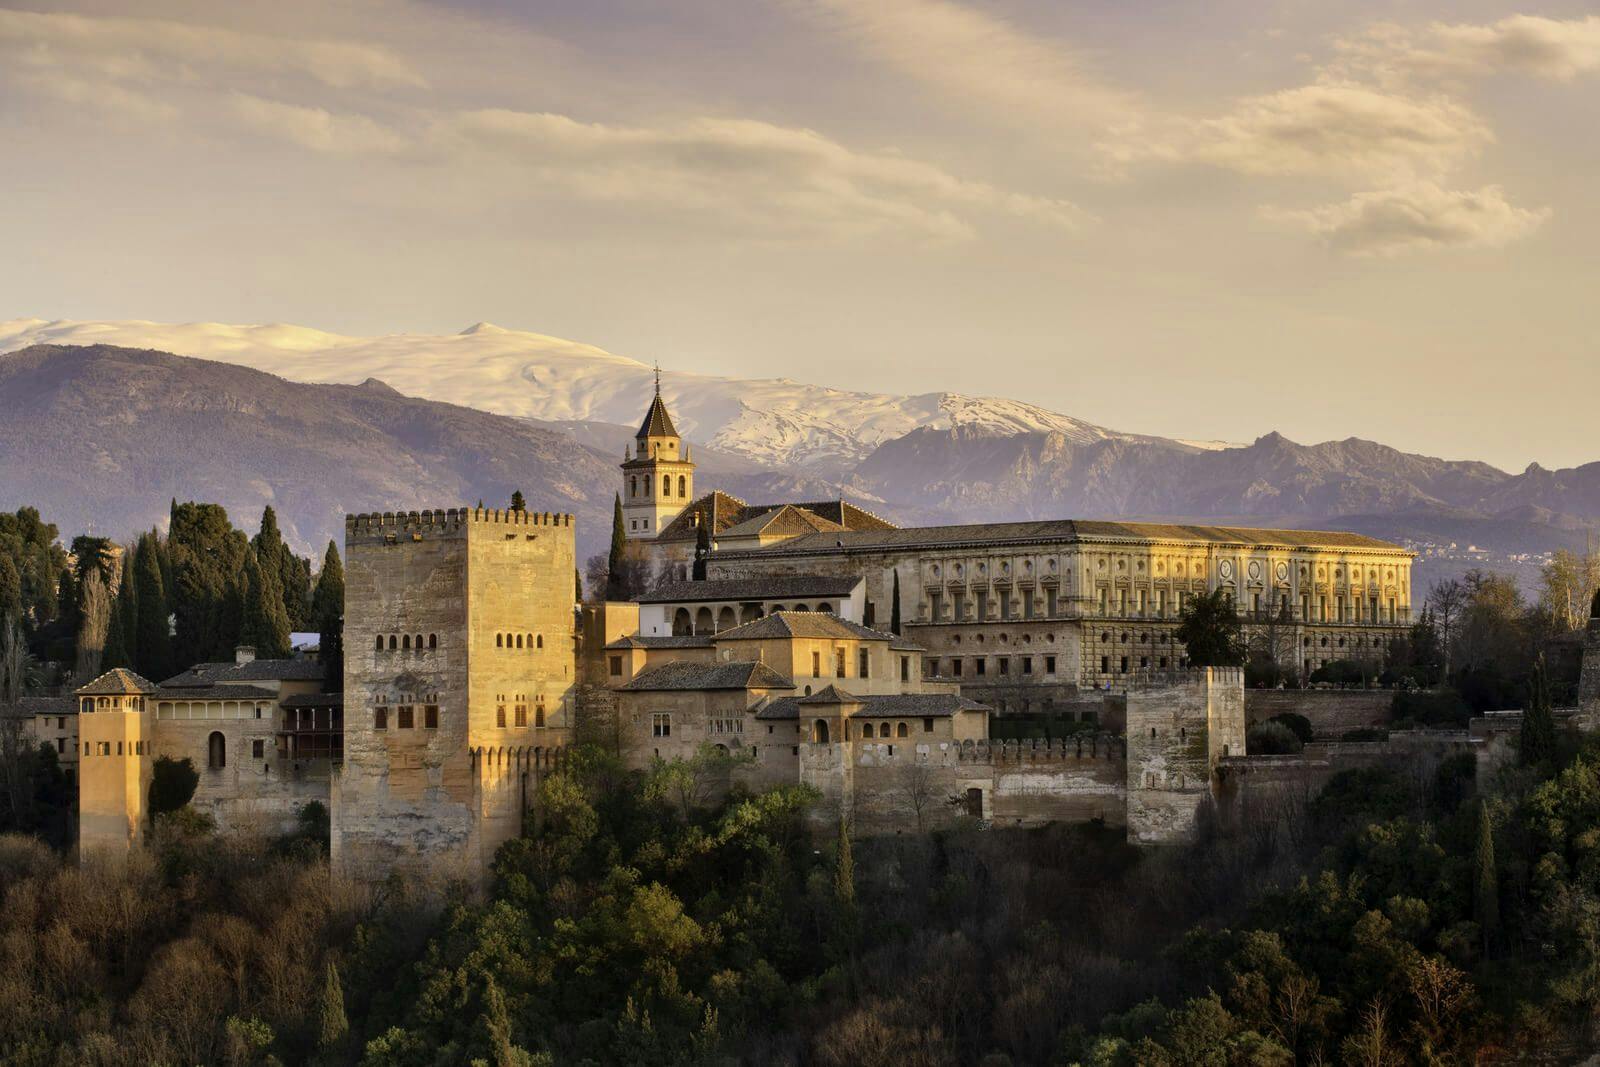 The Alhambra in Andalusia, Spain